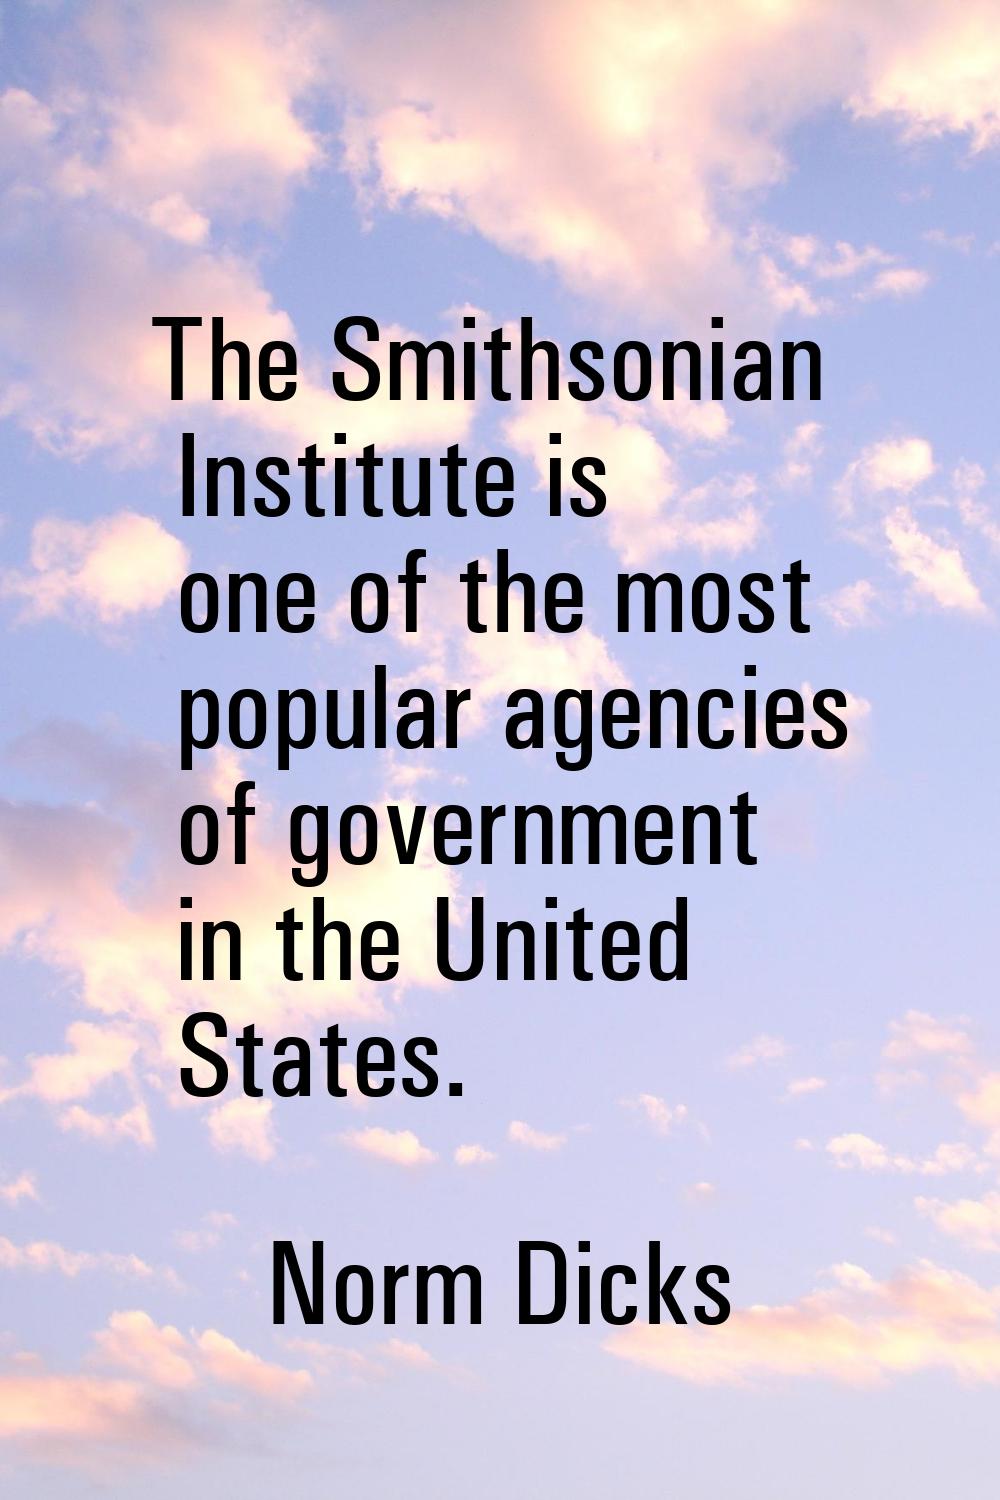 The Smithsonian Institute is one of the most popular agencies of government in the United States.